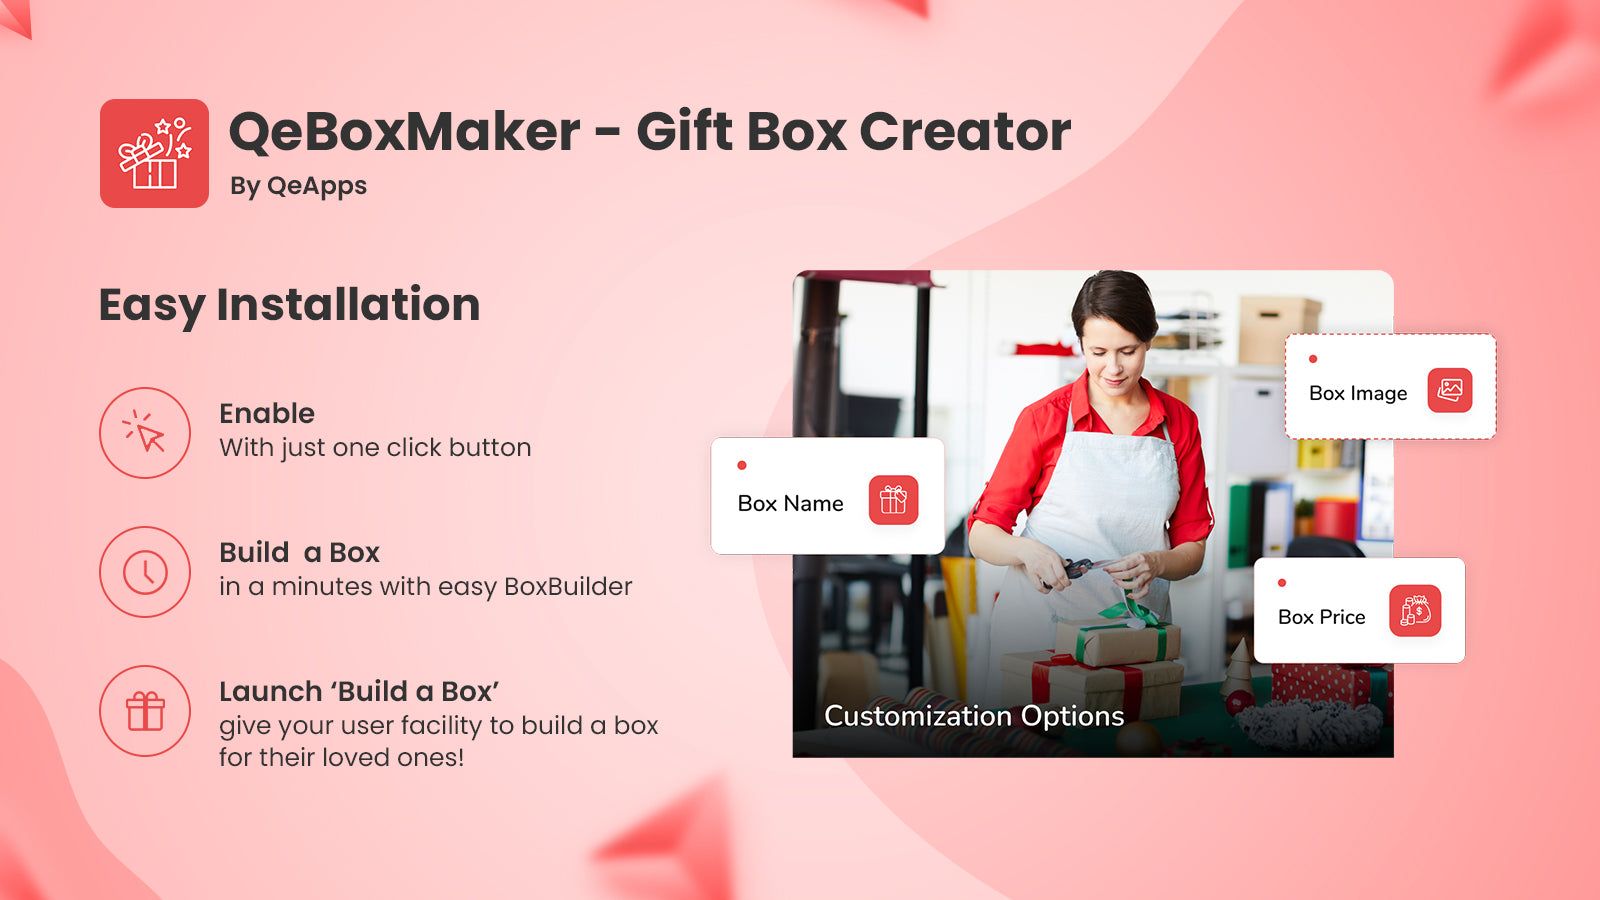 Seamless Gift Box Building